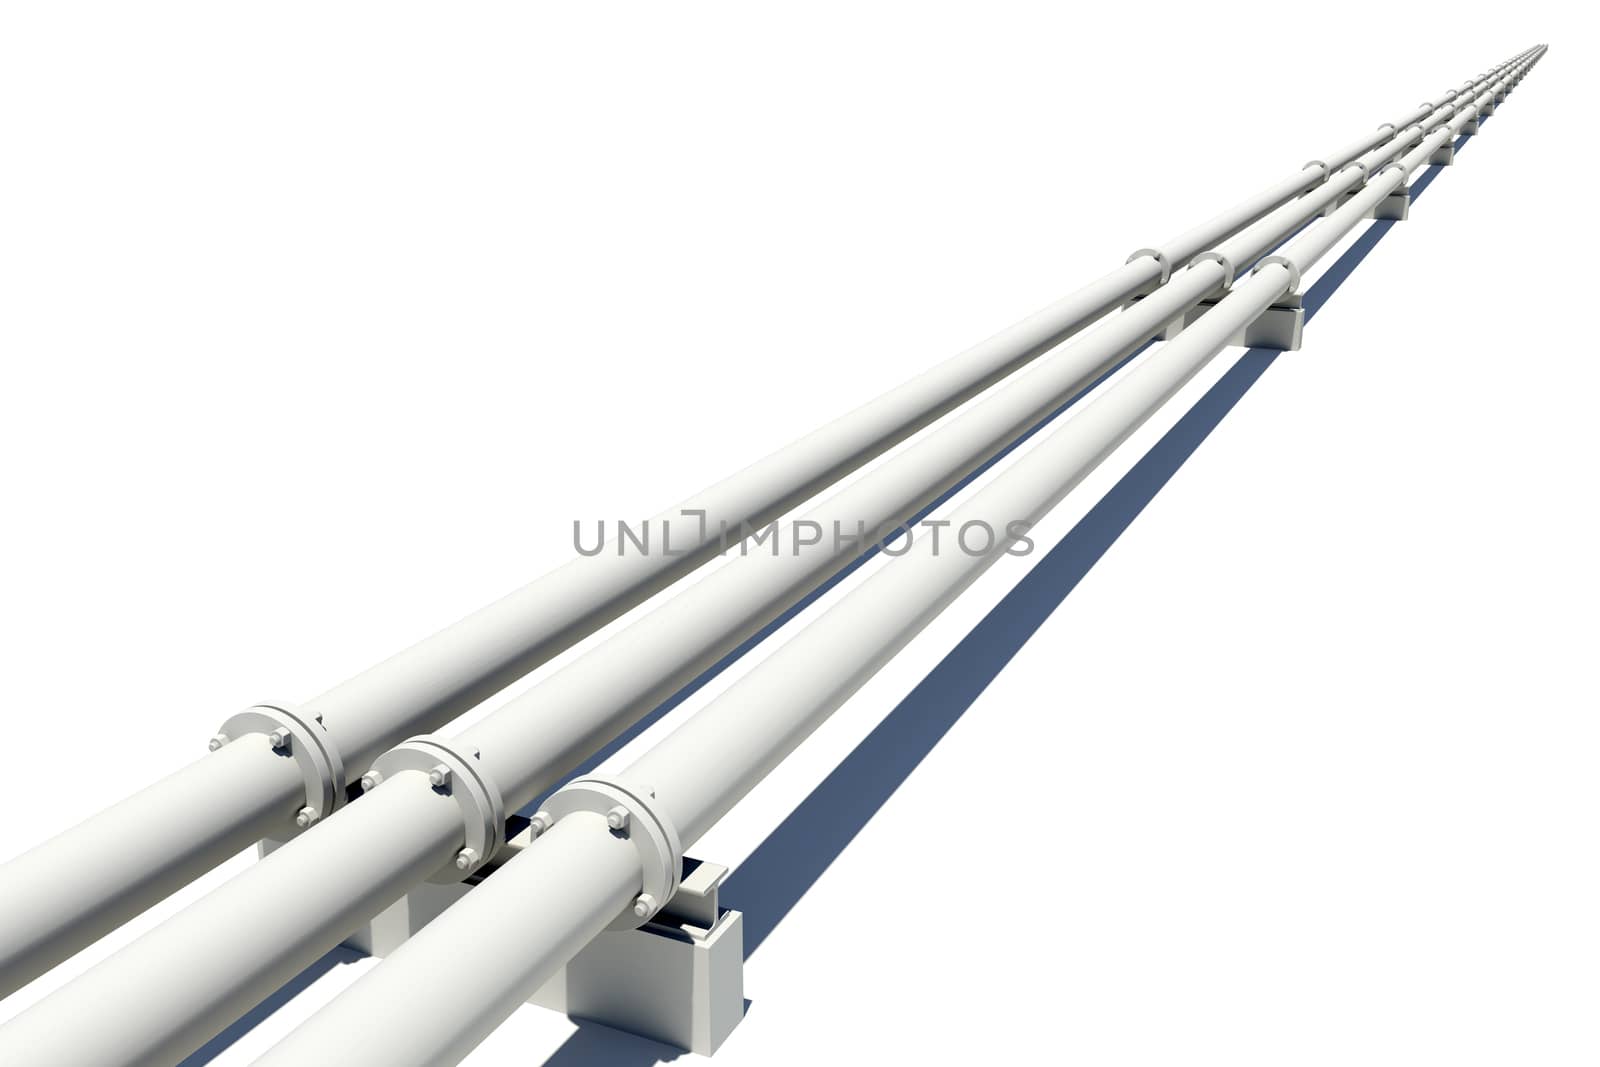 Three white industrial pipes stretching into distance. Isolated on white background